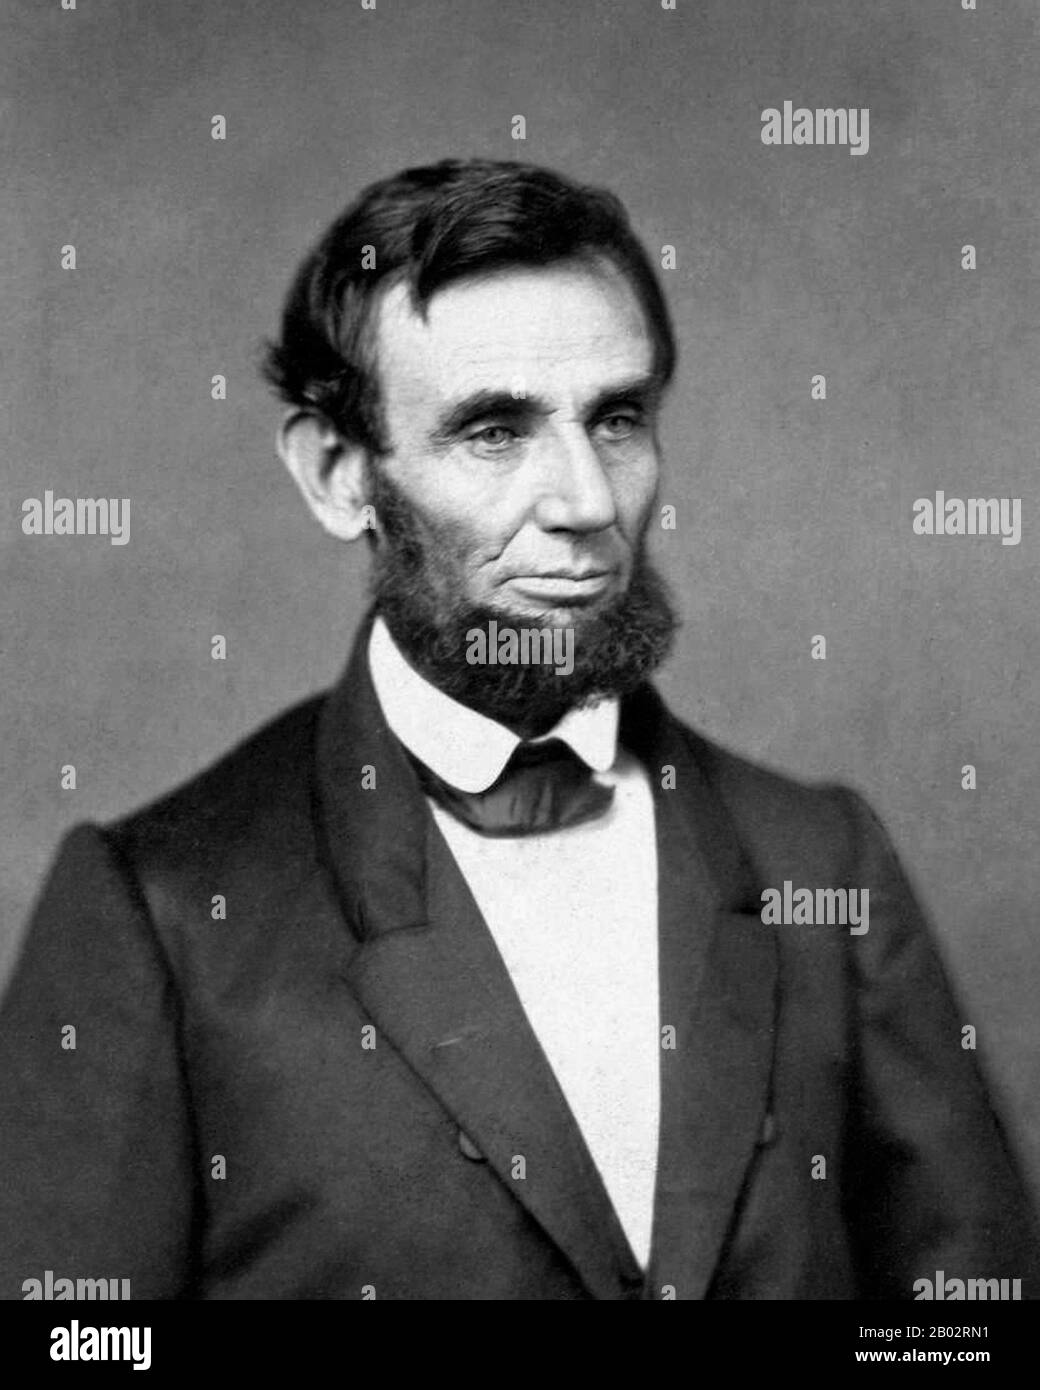 Abraham Lincoln (February 12, 1809 – April 15, 1865) was the 16th President of the United States, serving from March 1861 until his assassination in April 1865.  Lincoln led the United States through its Civil War—its bloodiest war and its greatest moral, constitutional and political crisis. In doing so, he preserved the Union, abolished slavery, strengthened the federal government, and modernized the economy. Stock Photo